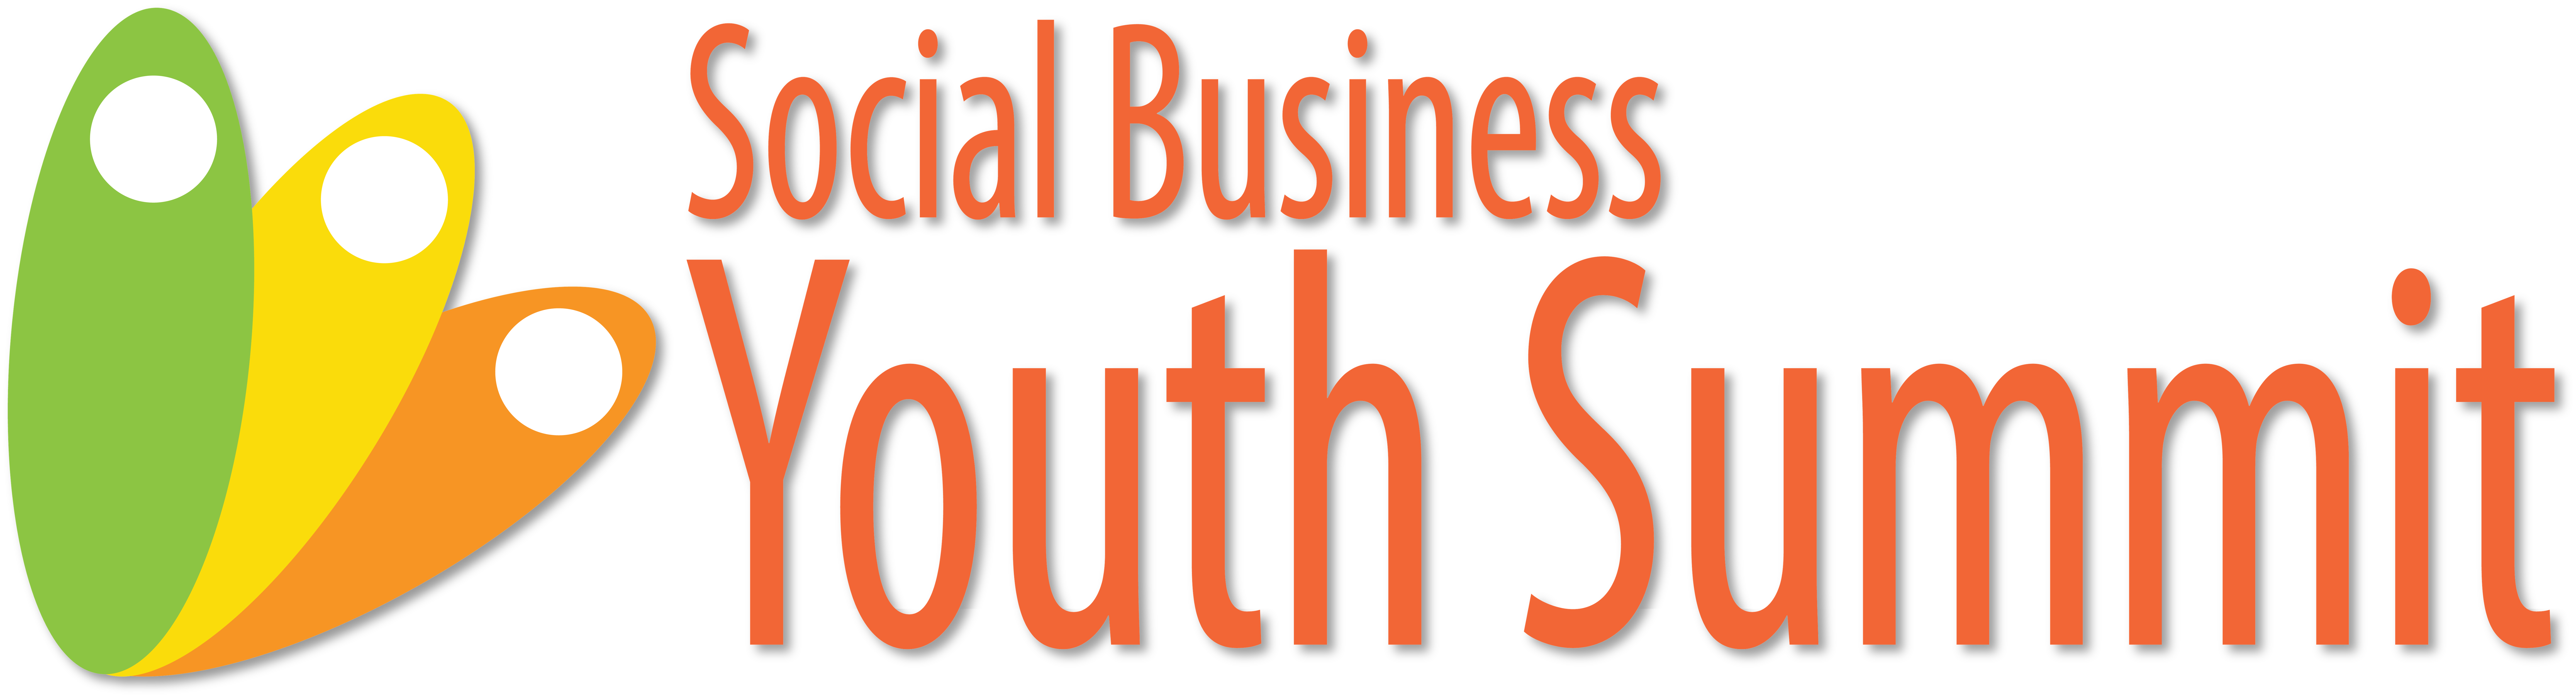 4th Annual Social Business Youth Summit 2017